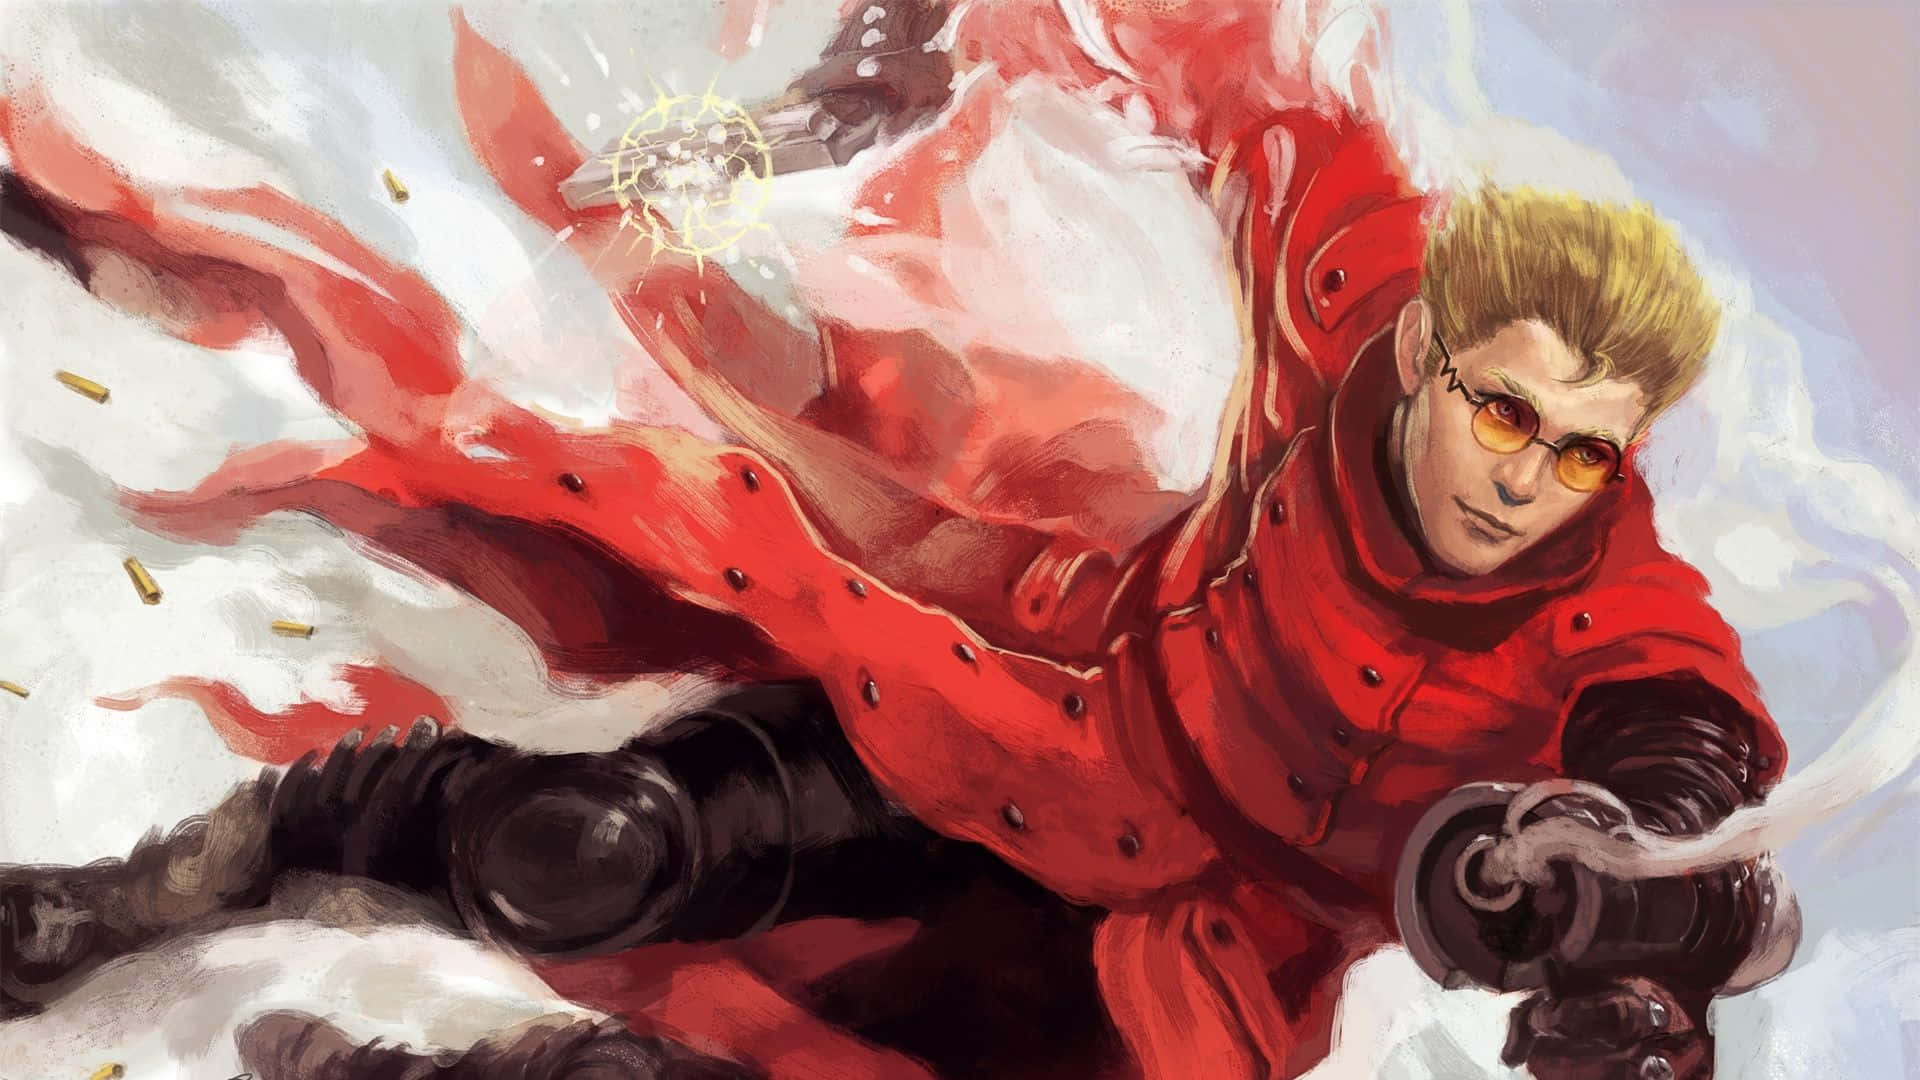 Vash the Stampede of Trigun - A Brave Man and a Feared Outlaw